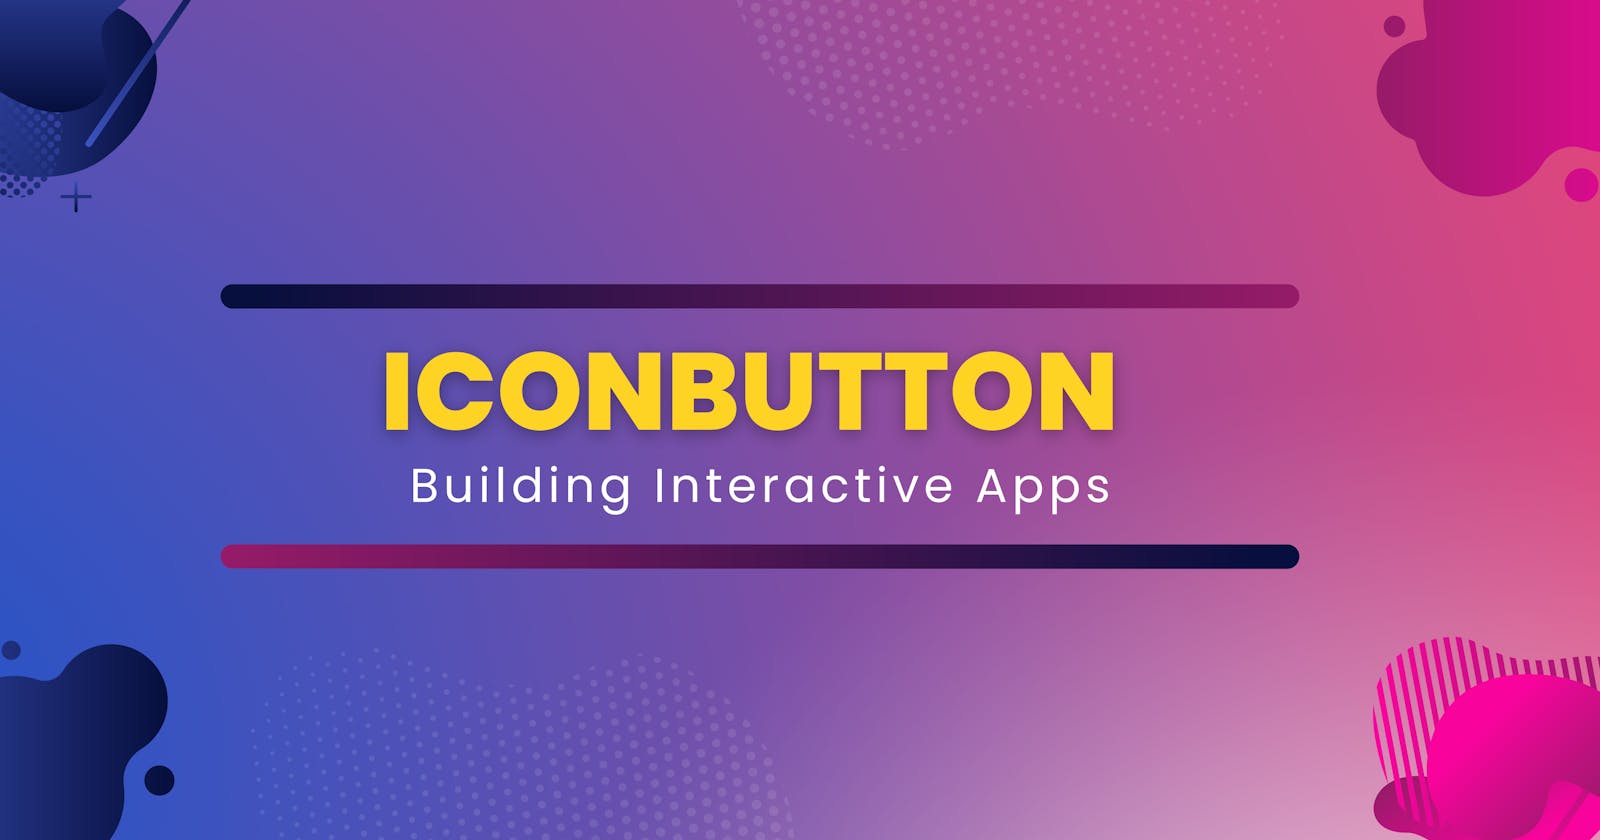 Build Interactive UIs with IconButton in Flutter